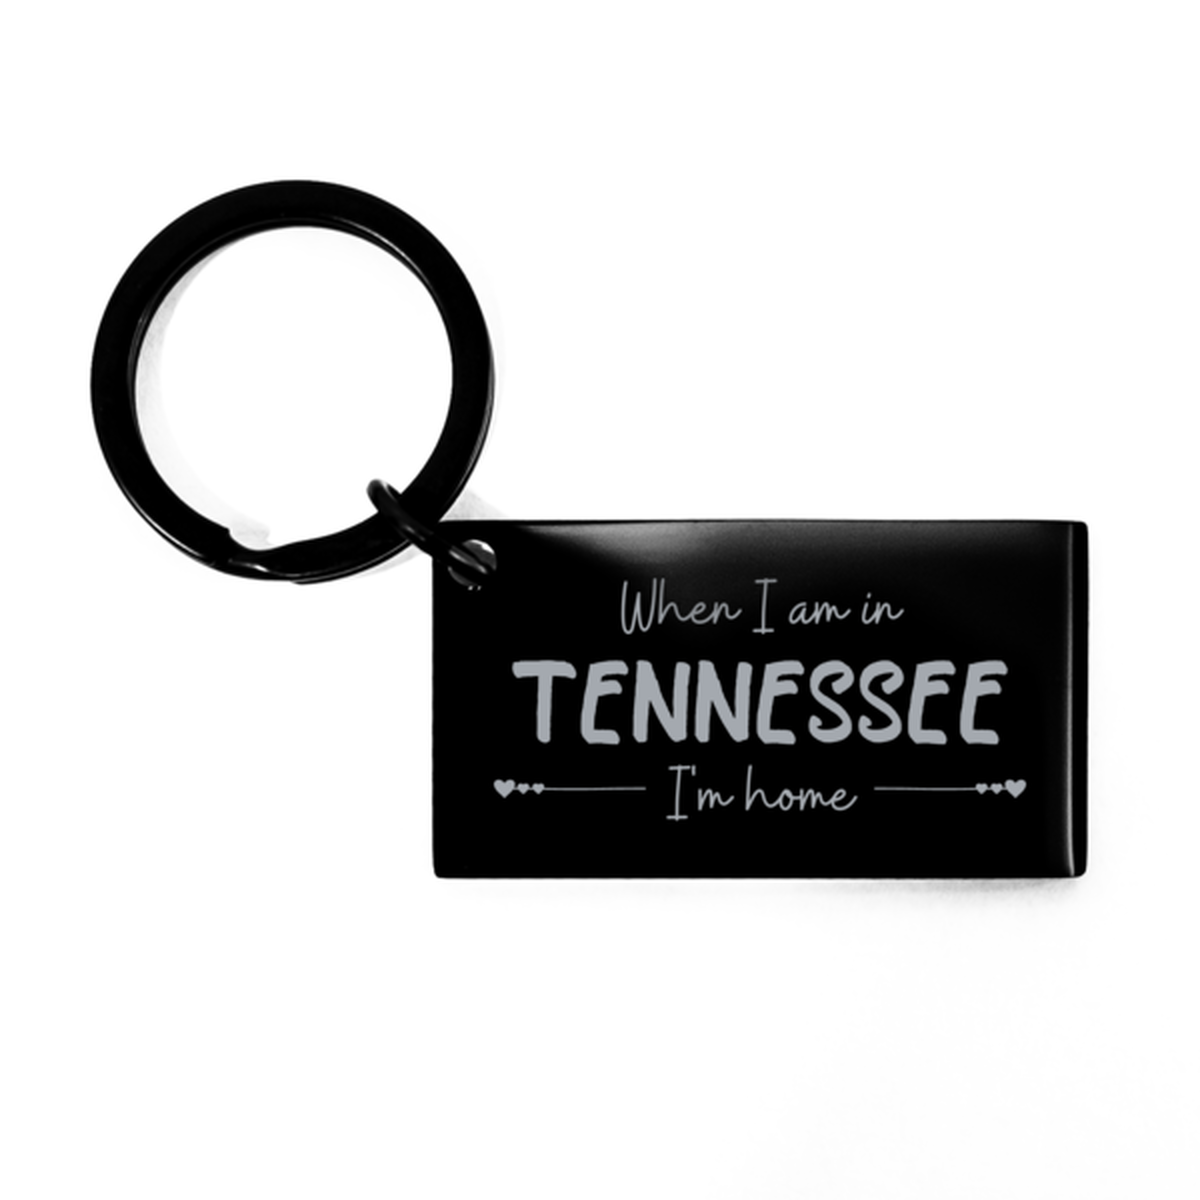 When I am in Tennessee I'm home Keychain, Cheap Gifts For Tennessee, State Tennessee Birthday Gifts for Friends Coworker